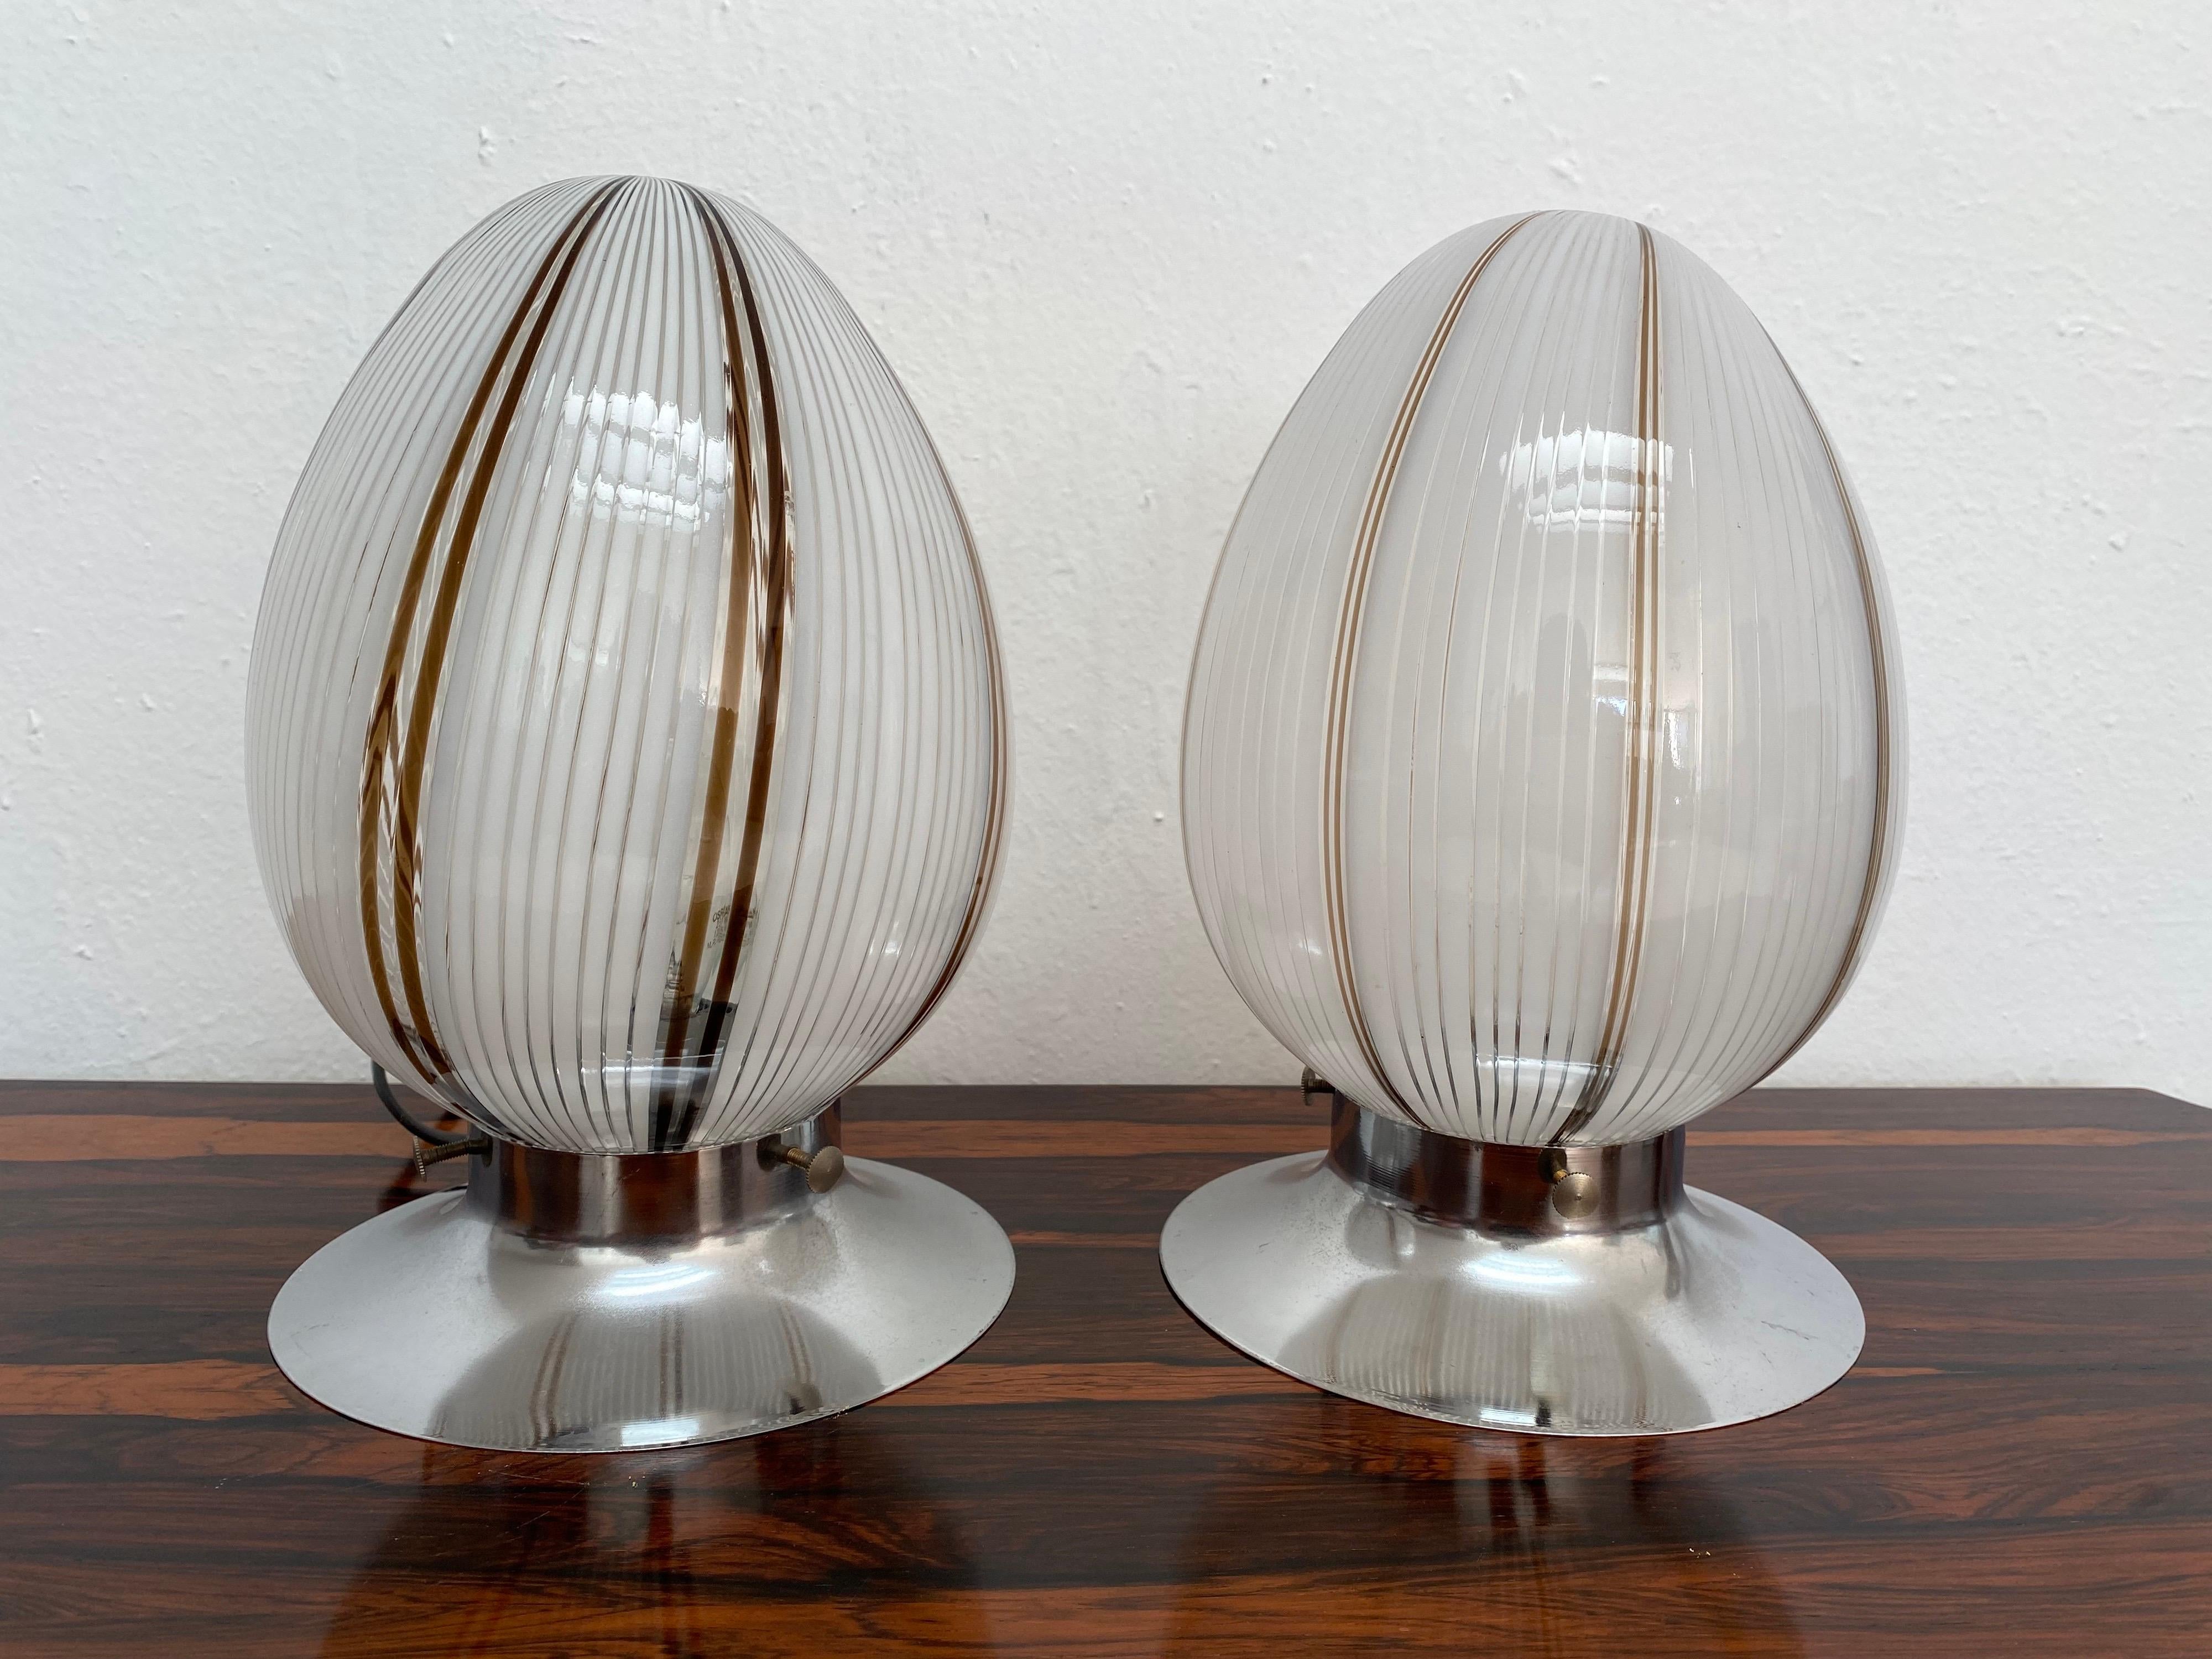 Space Age Pair of Mid-Century Modern Table Lamps Attributed to Venini, Murano, circa 1980 For Sale